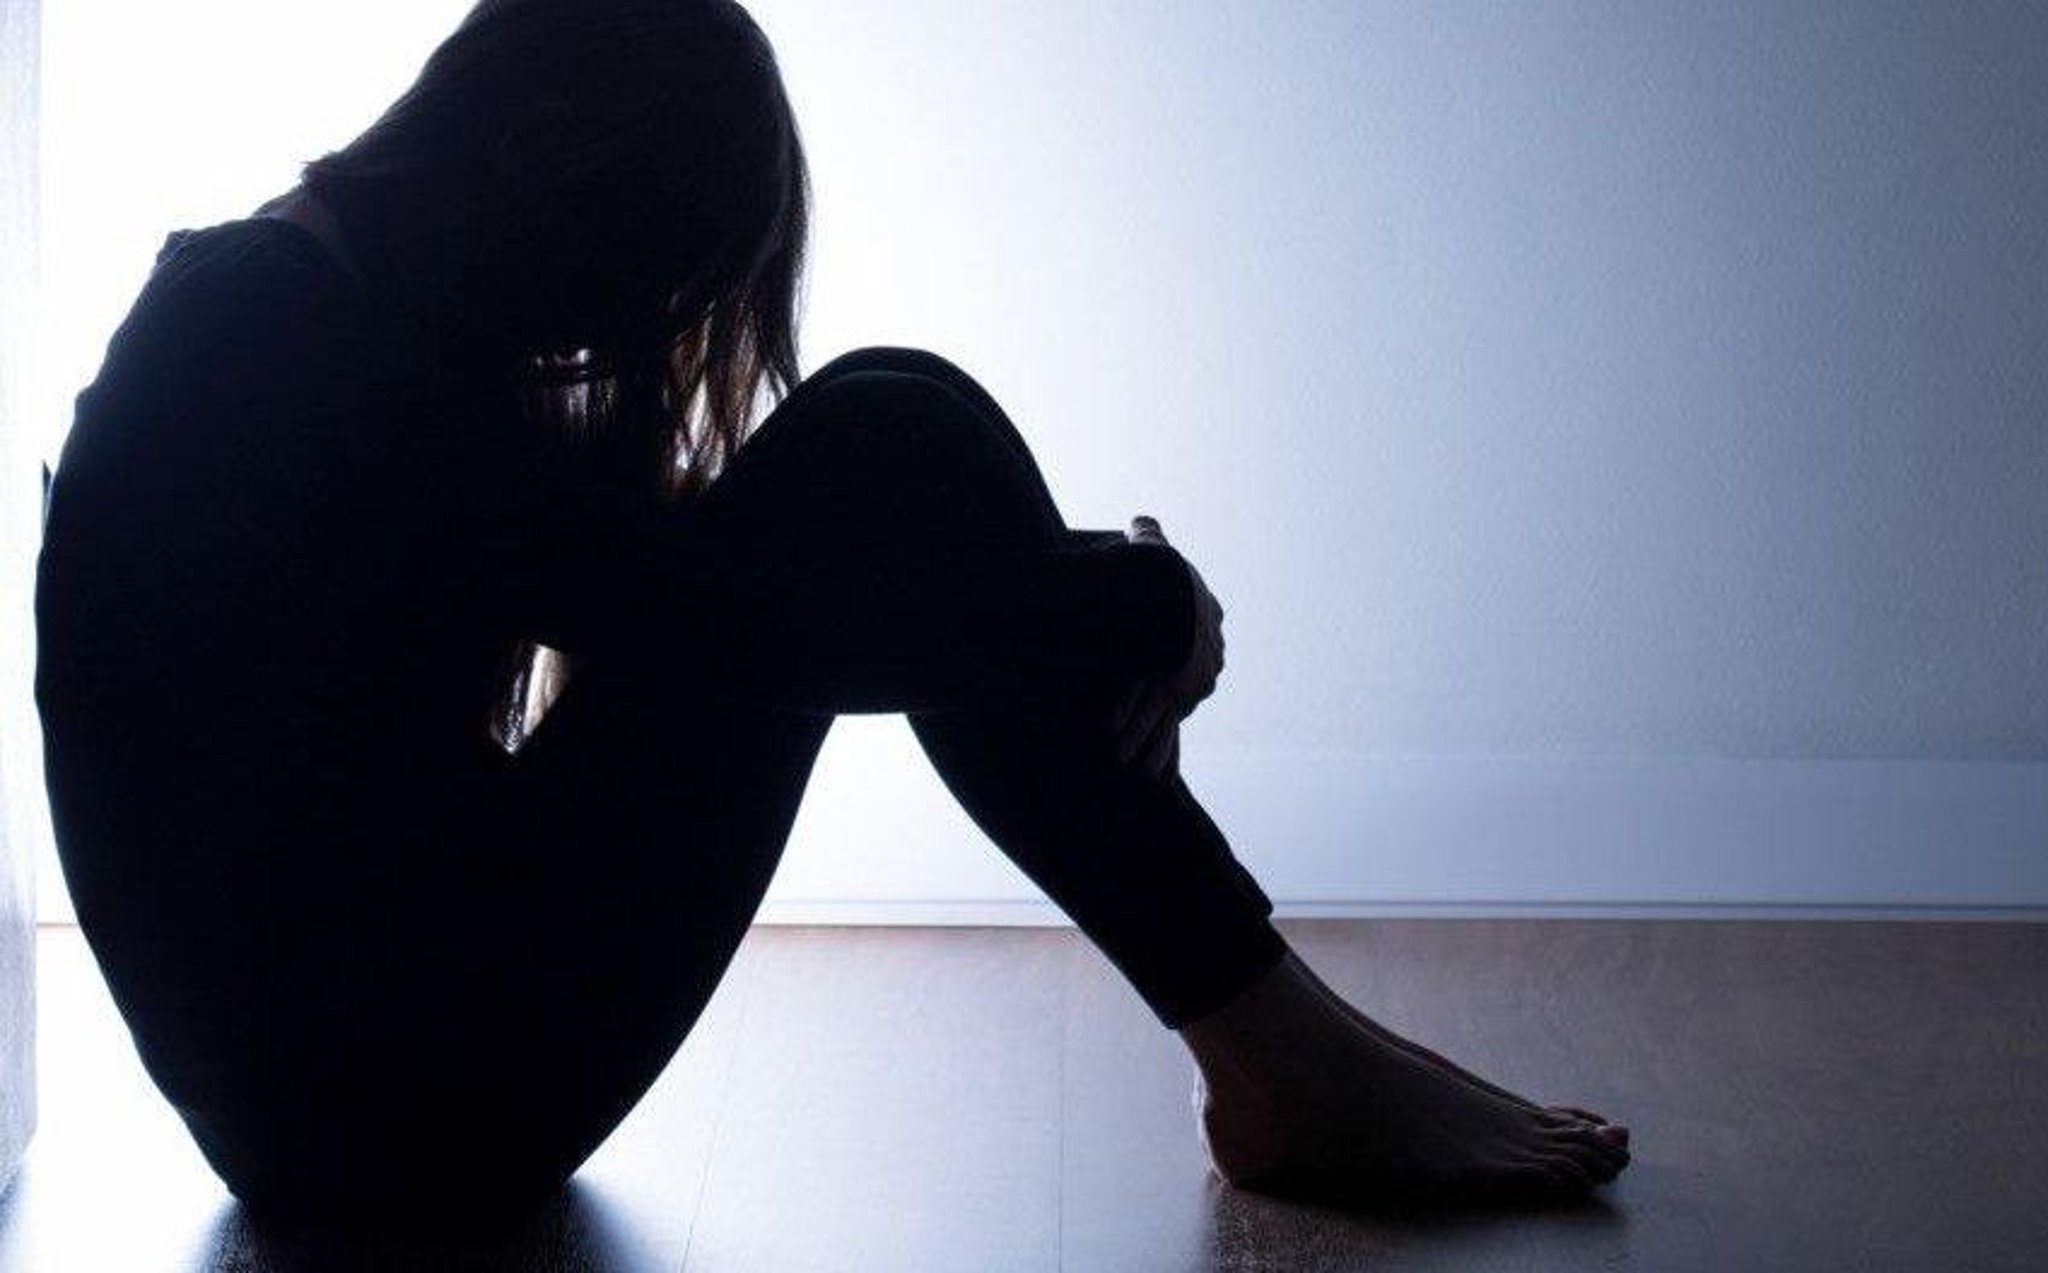 NHS Lothian launches service to provide care for victims of gender based violence